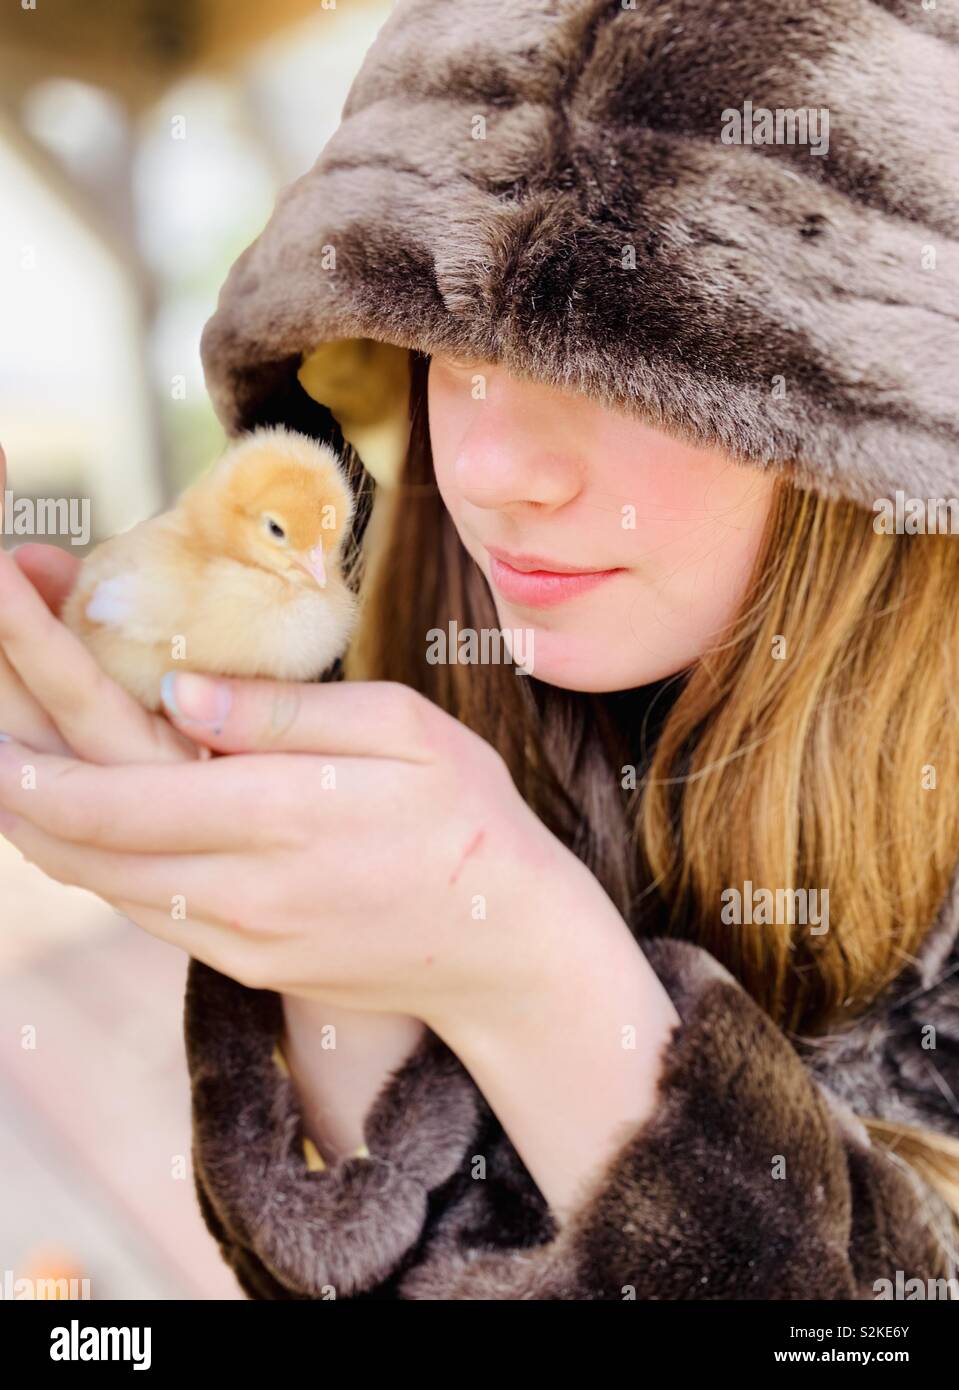 A girl holding a baby chick Stock Photo